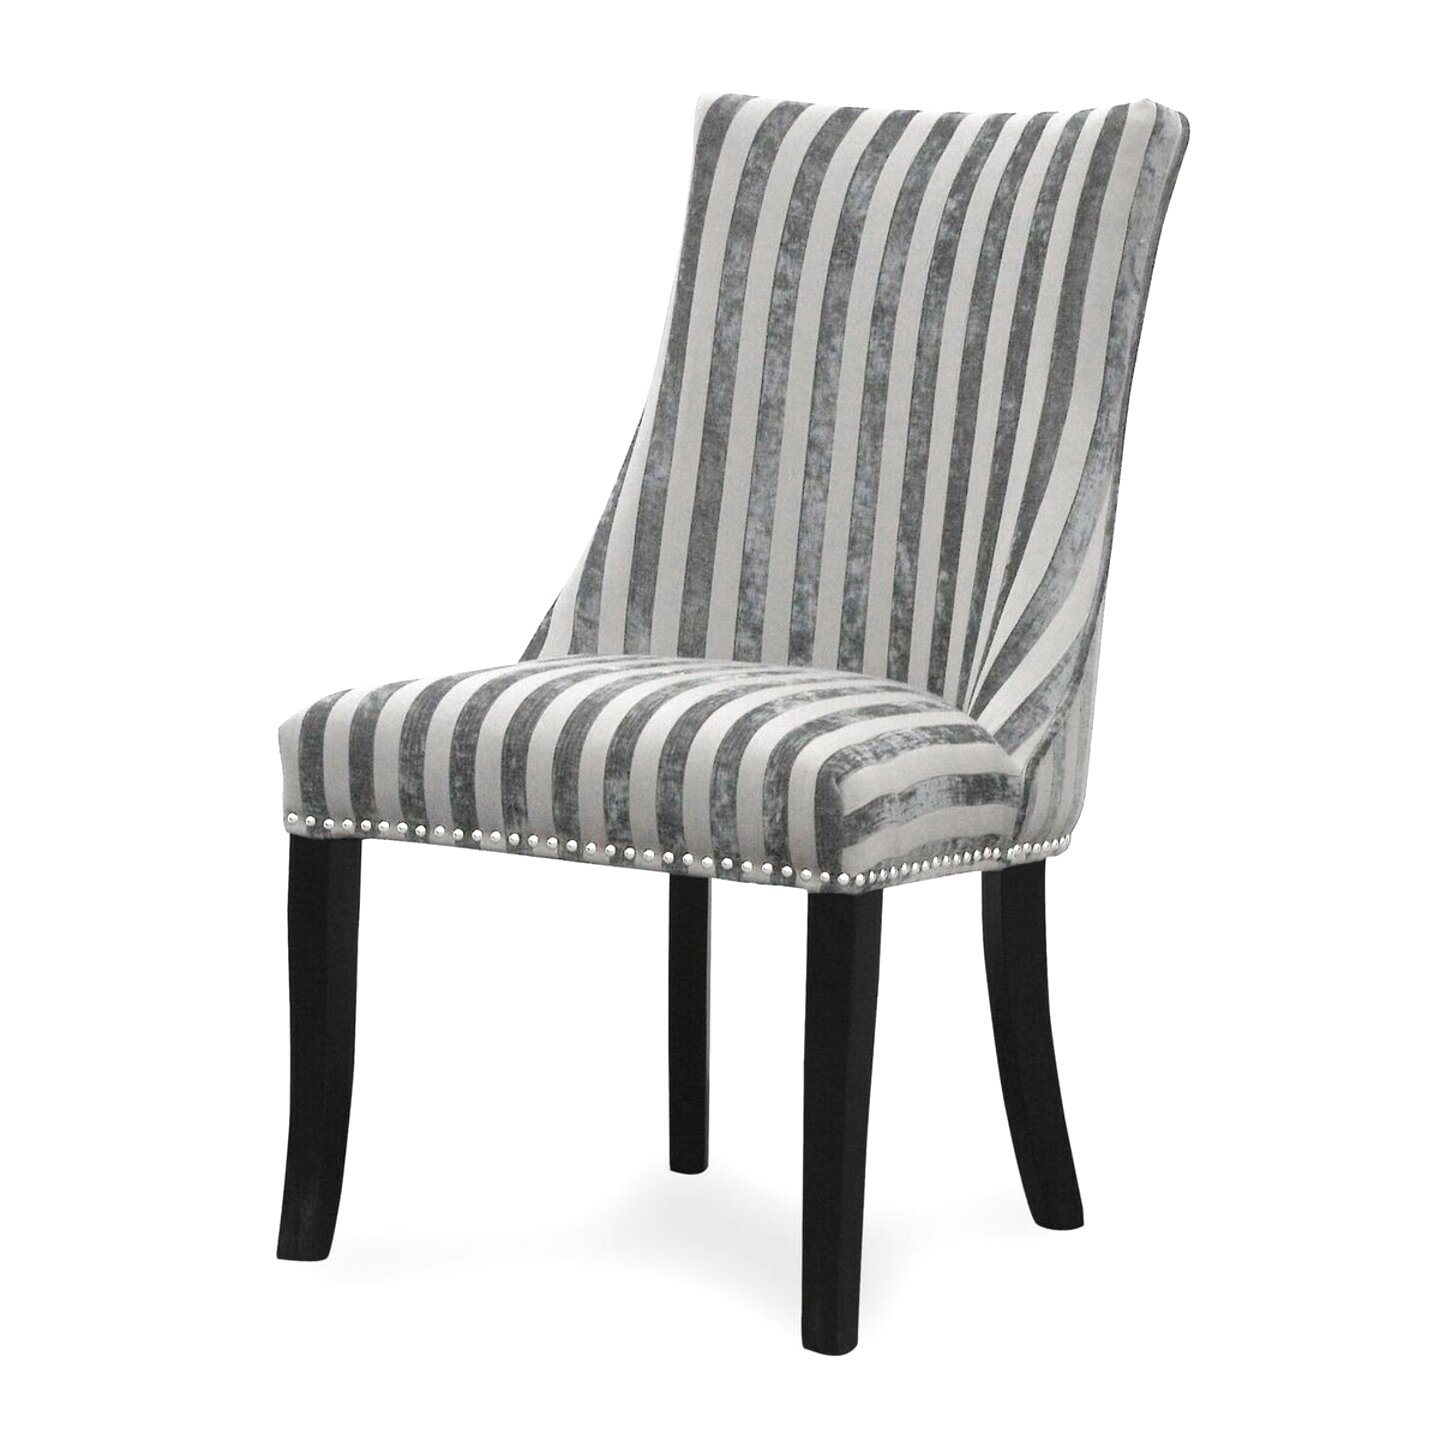 Striped Dining Chair For Sale In Uk View 25 Bargains